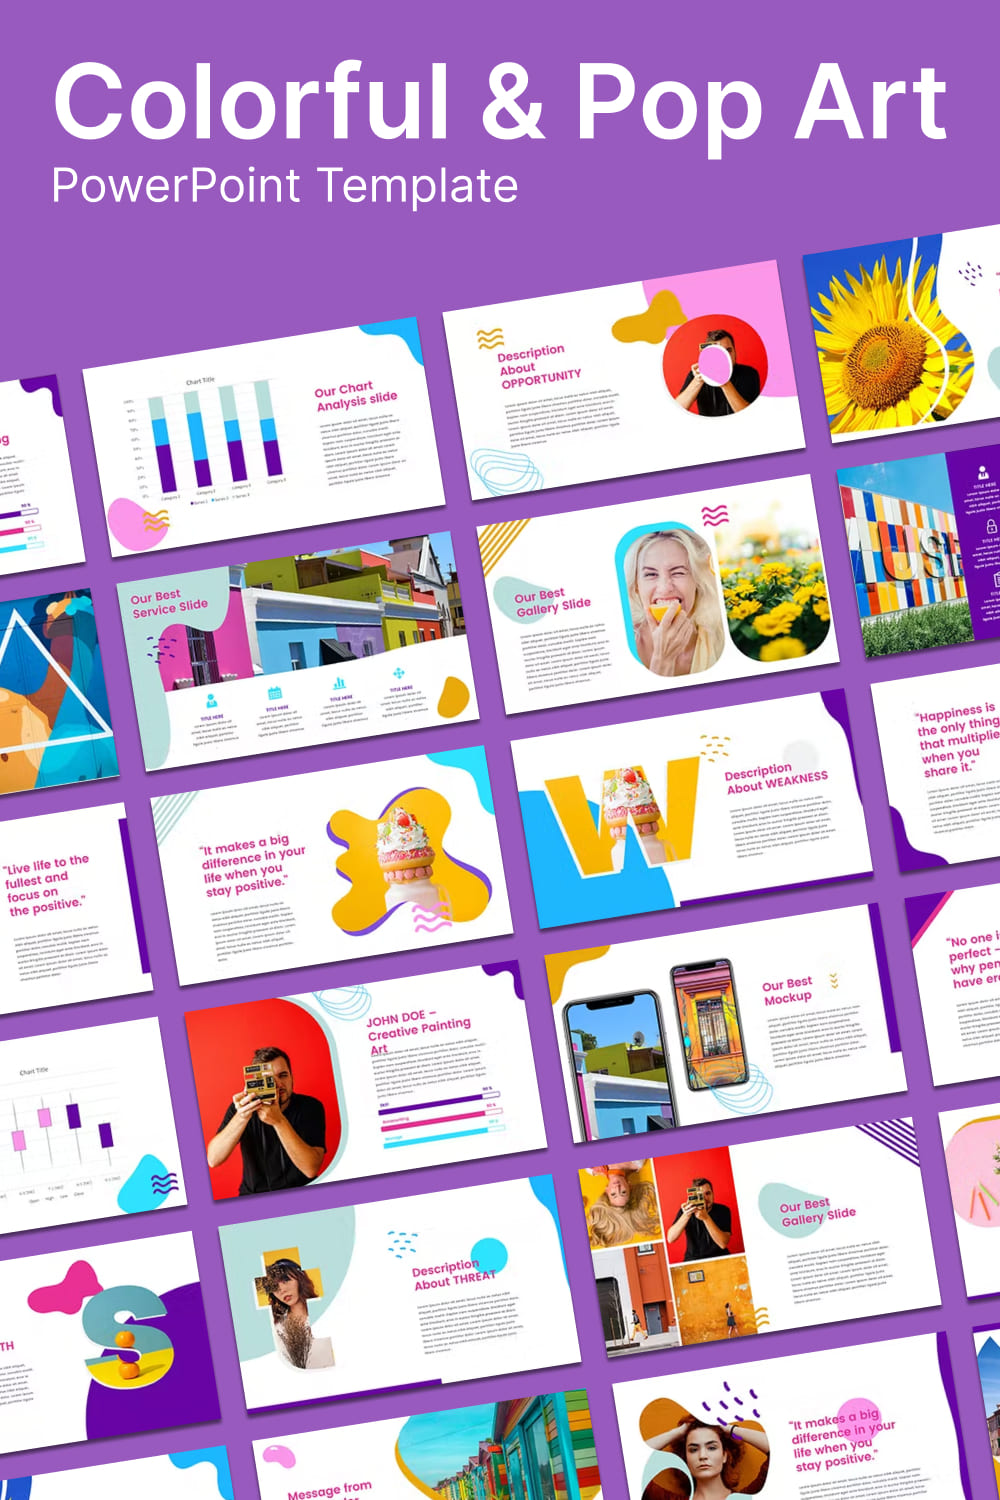 Colorful pop art powerpoint template - pinterest image preview.